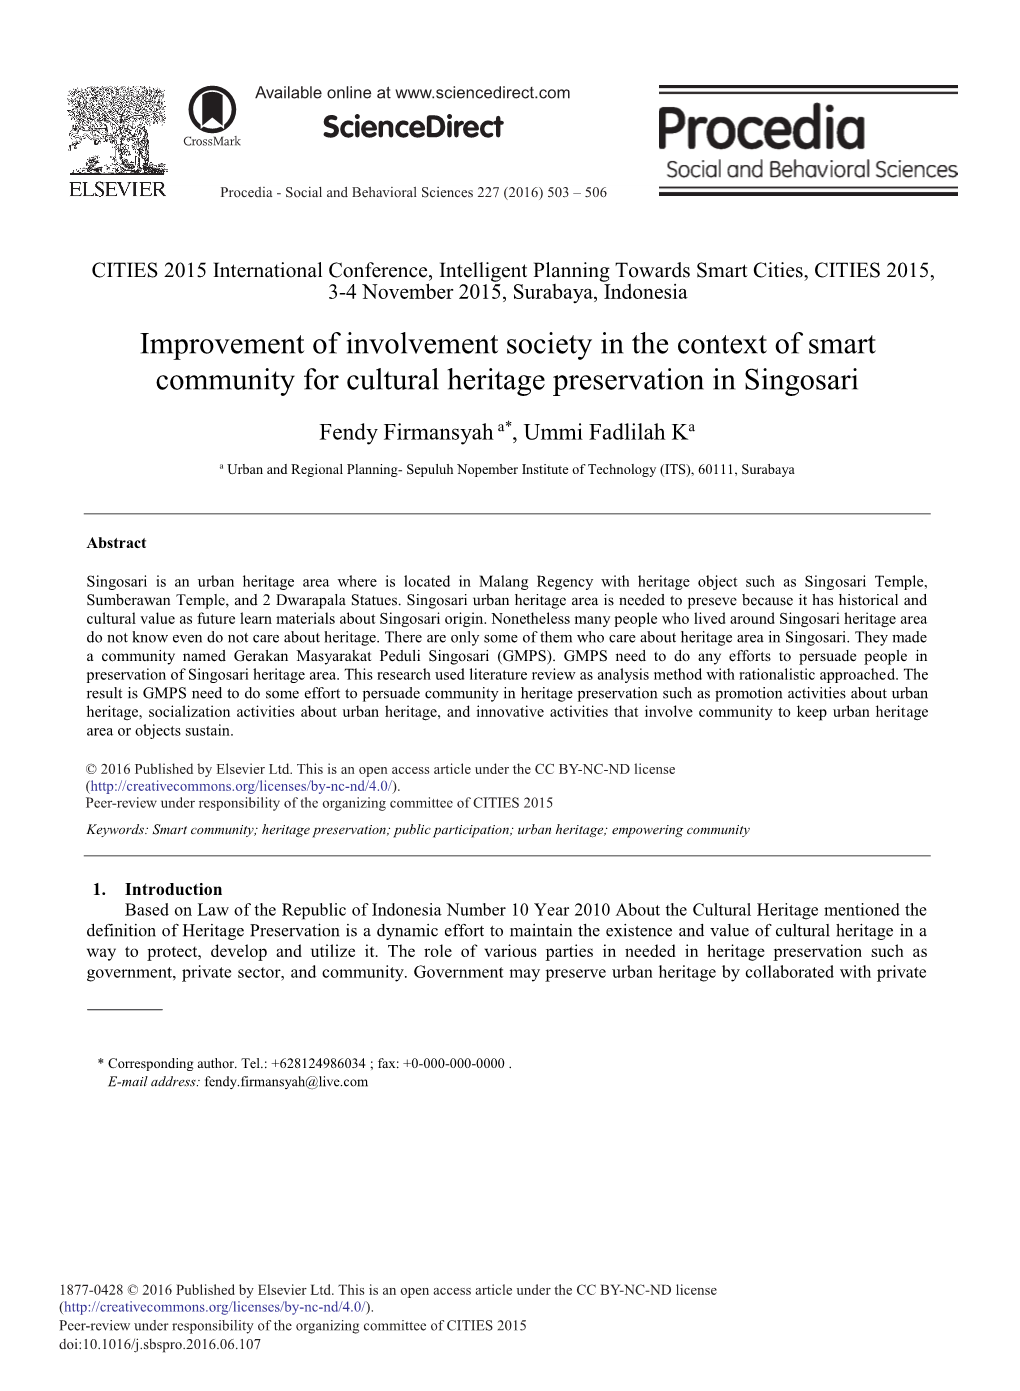 Improvement of Involvement Society in the Context of Smart Community for Cultural Heritage Preservation in Singosari